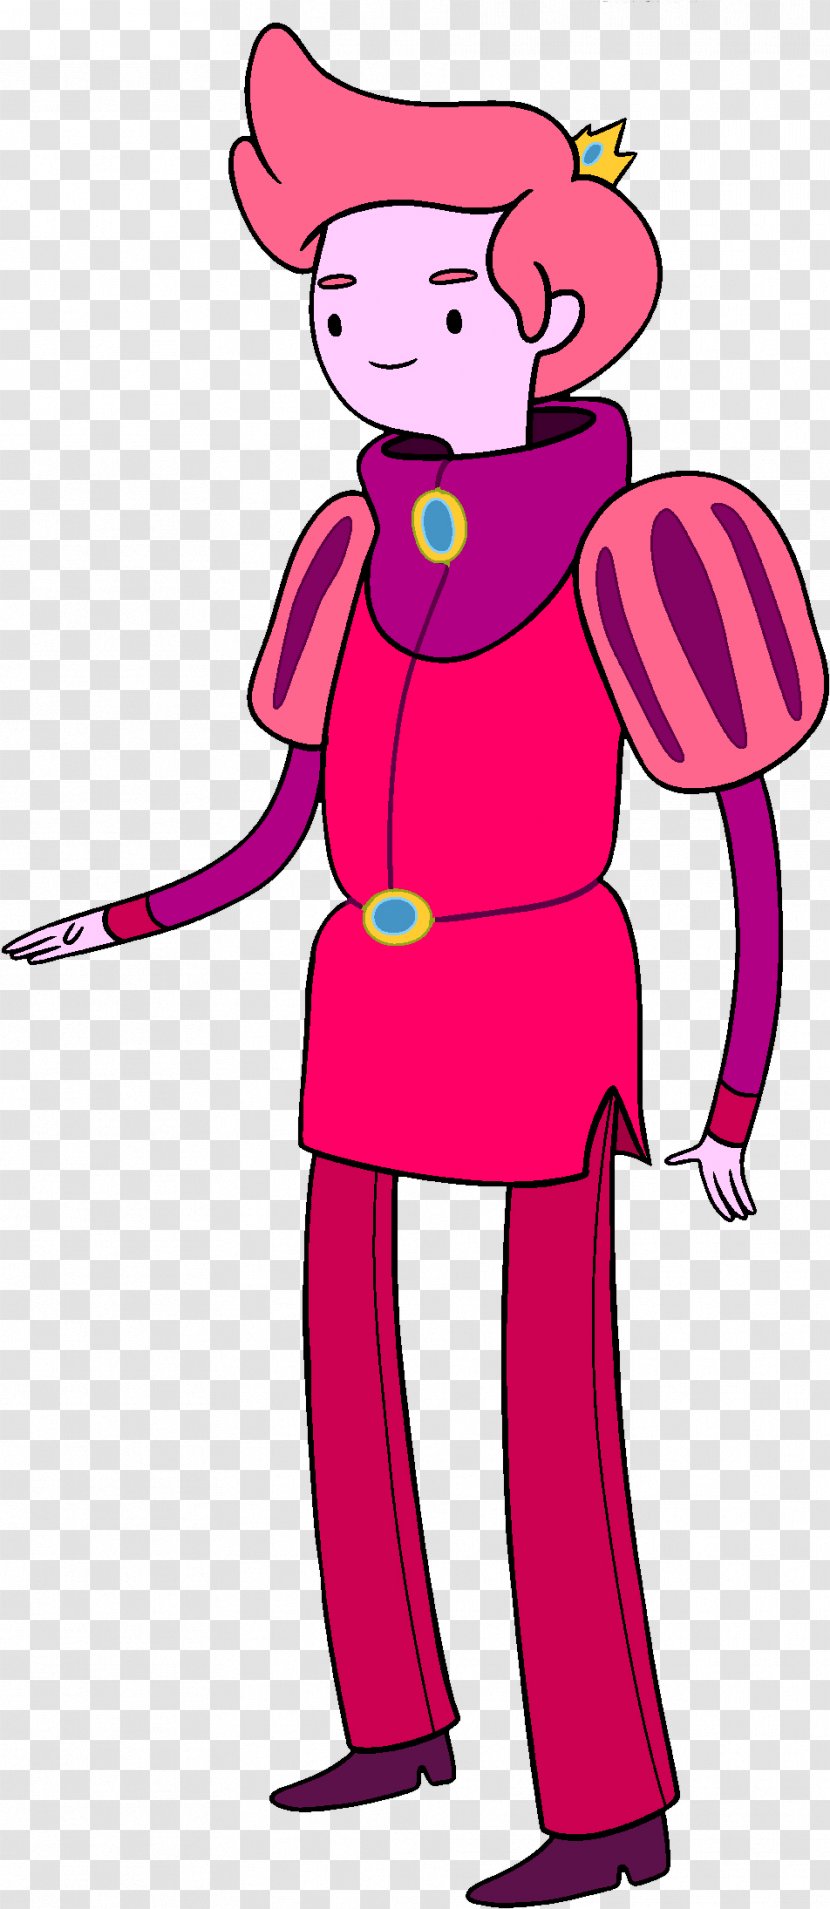 Marceline The Vampire Queen Ice King Princess Bubblegum Fionna And Cake Character - Tree - Adventure Time Transparent PNG